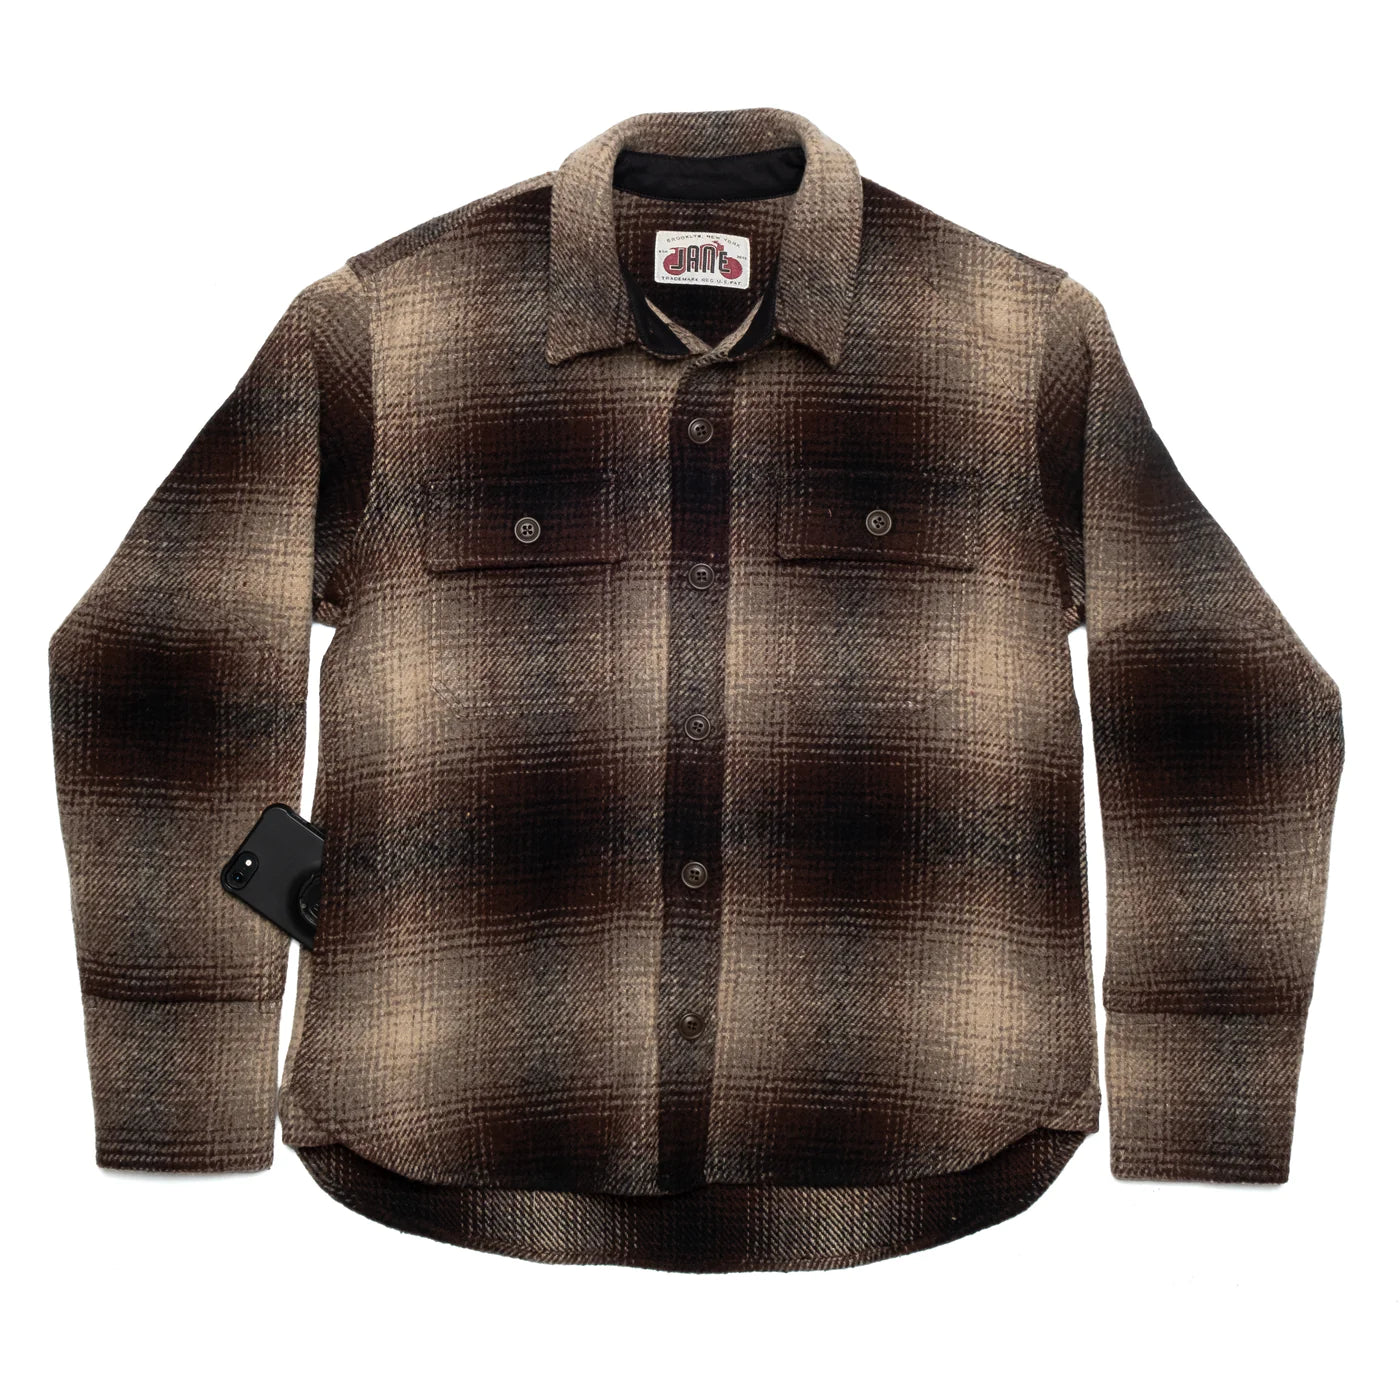 Jane Motorcycle The Mercer Riding Shirt - Wool Plaid Limited Edition